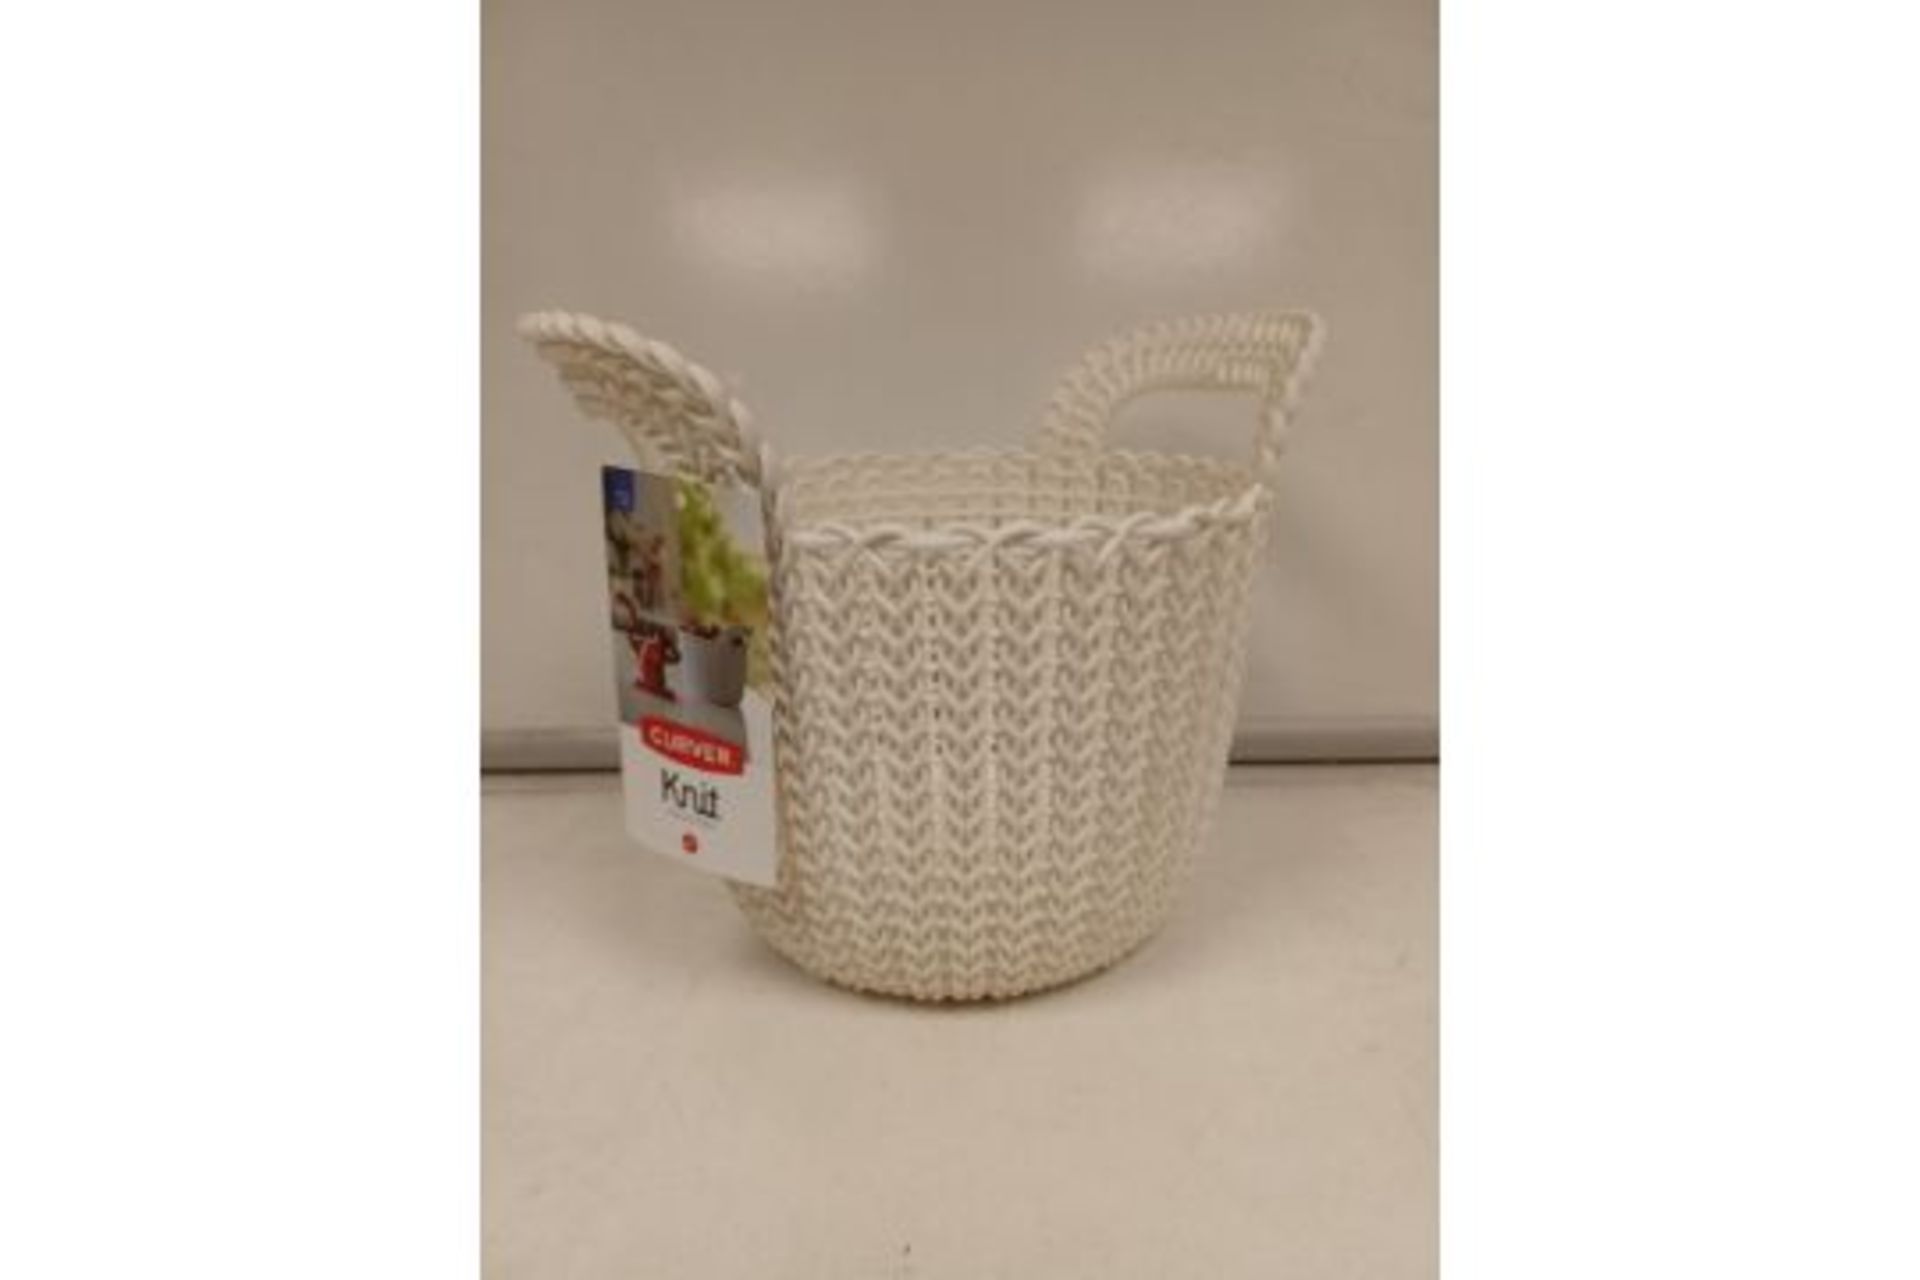 PALLET TO CONTAIN 250 X New Curver Knit 3 Litre Round Basket. White. (226385) Crafted with a knitted